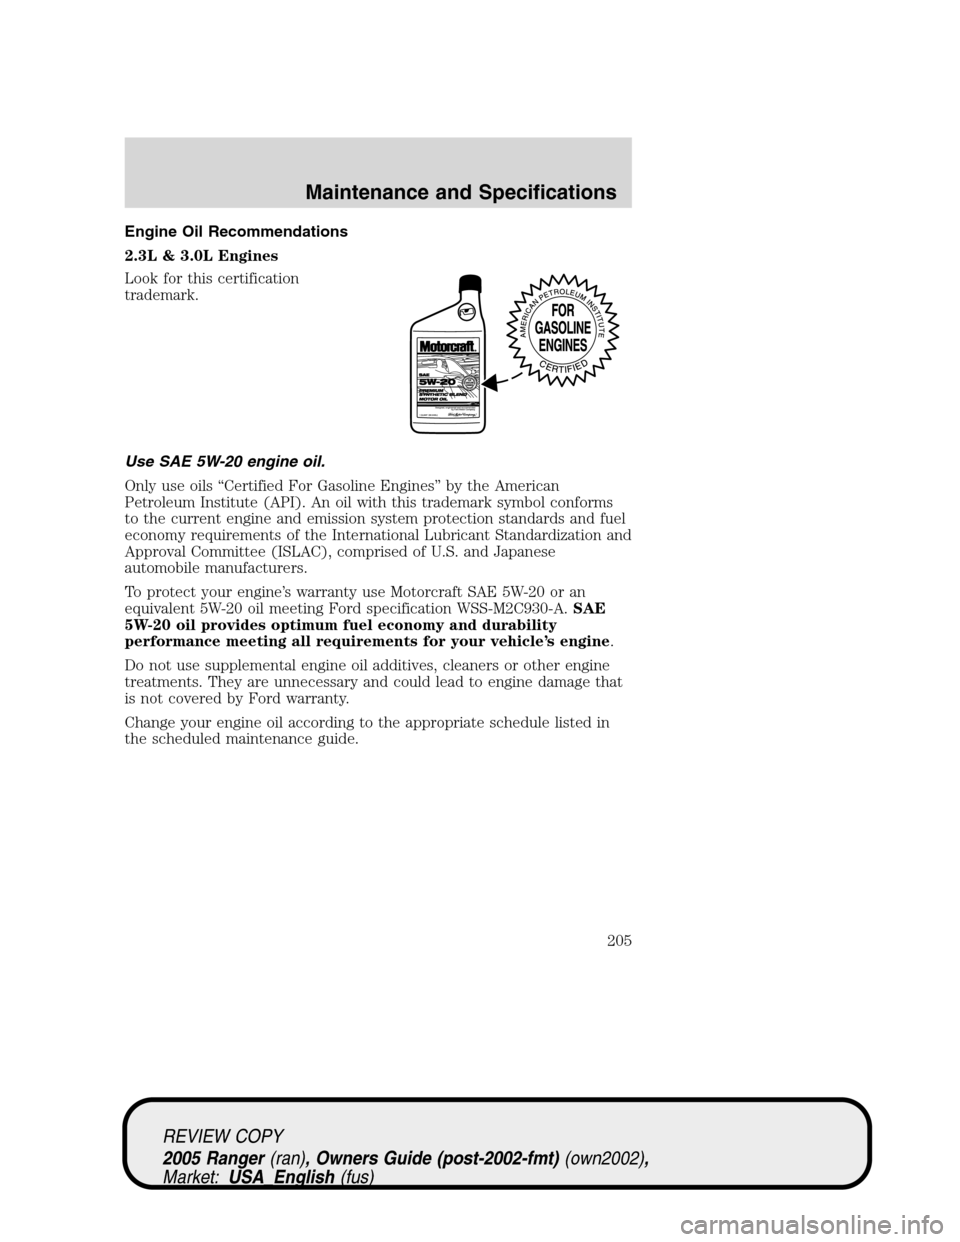 FORD RANGER 2005 2.G Owners Manual Engine Oil Recommendations
2.3L & 3.0L Engines
Look for this certification
trademark.
Use SAE 5W-20 engine oil.
Only use oils“Certified For Gasoline Engines”by the American
Petroleum Institute (AP